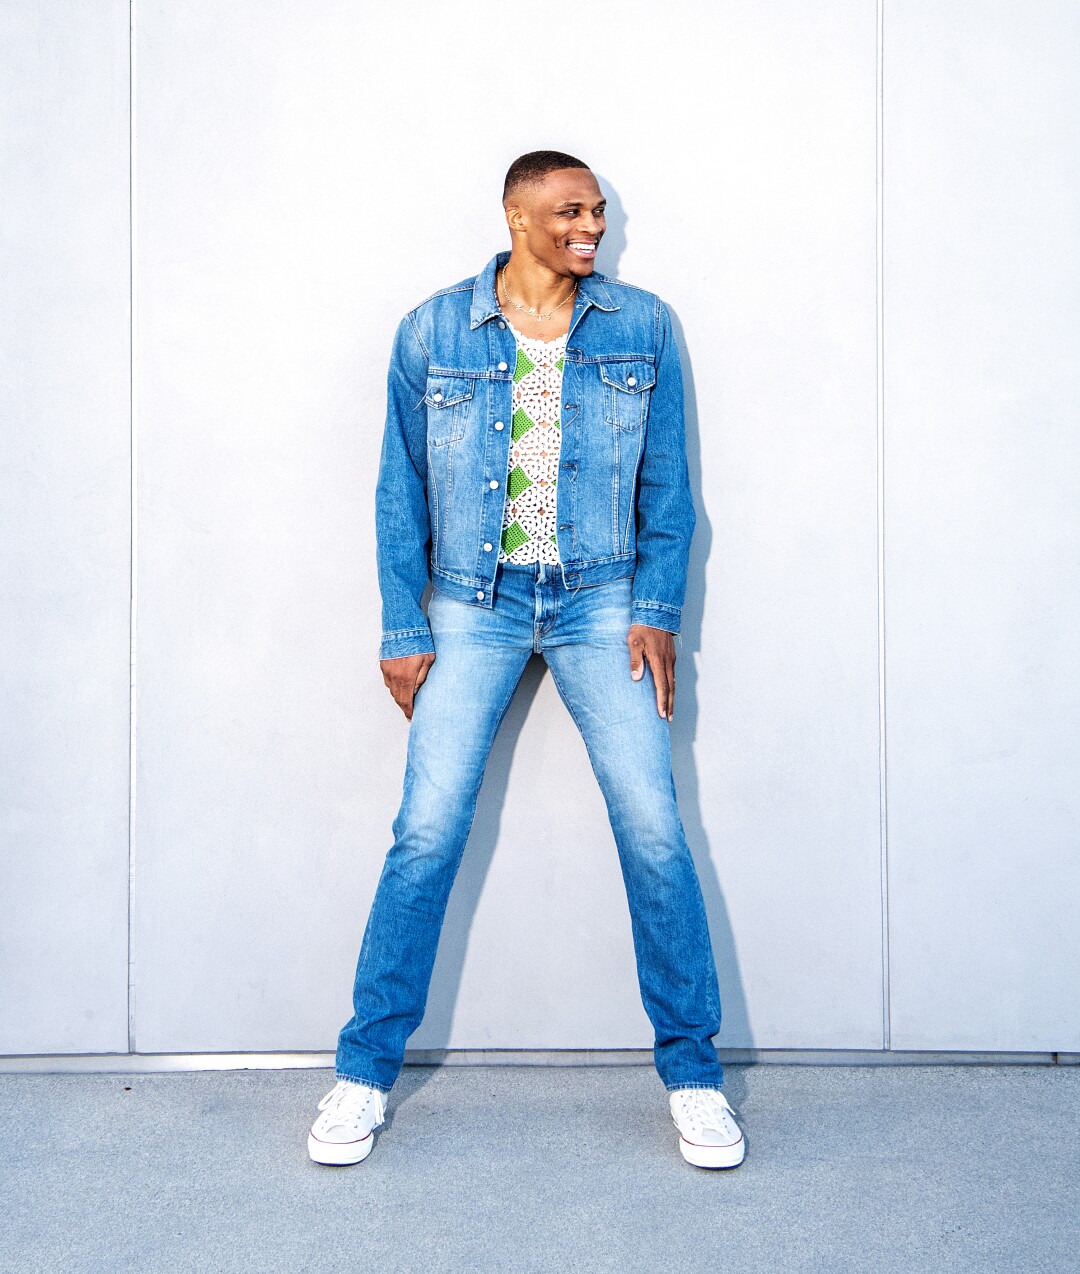 Russell Westbrook stands in jeans and a jean jacket